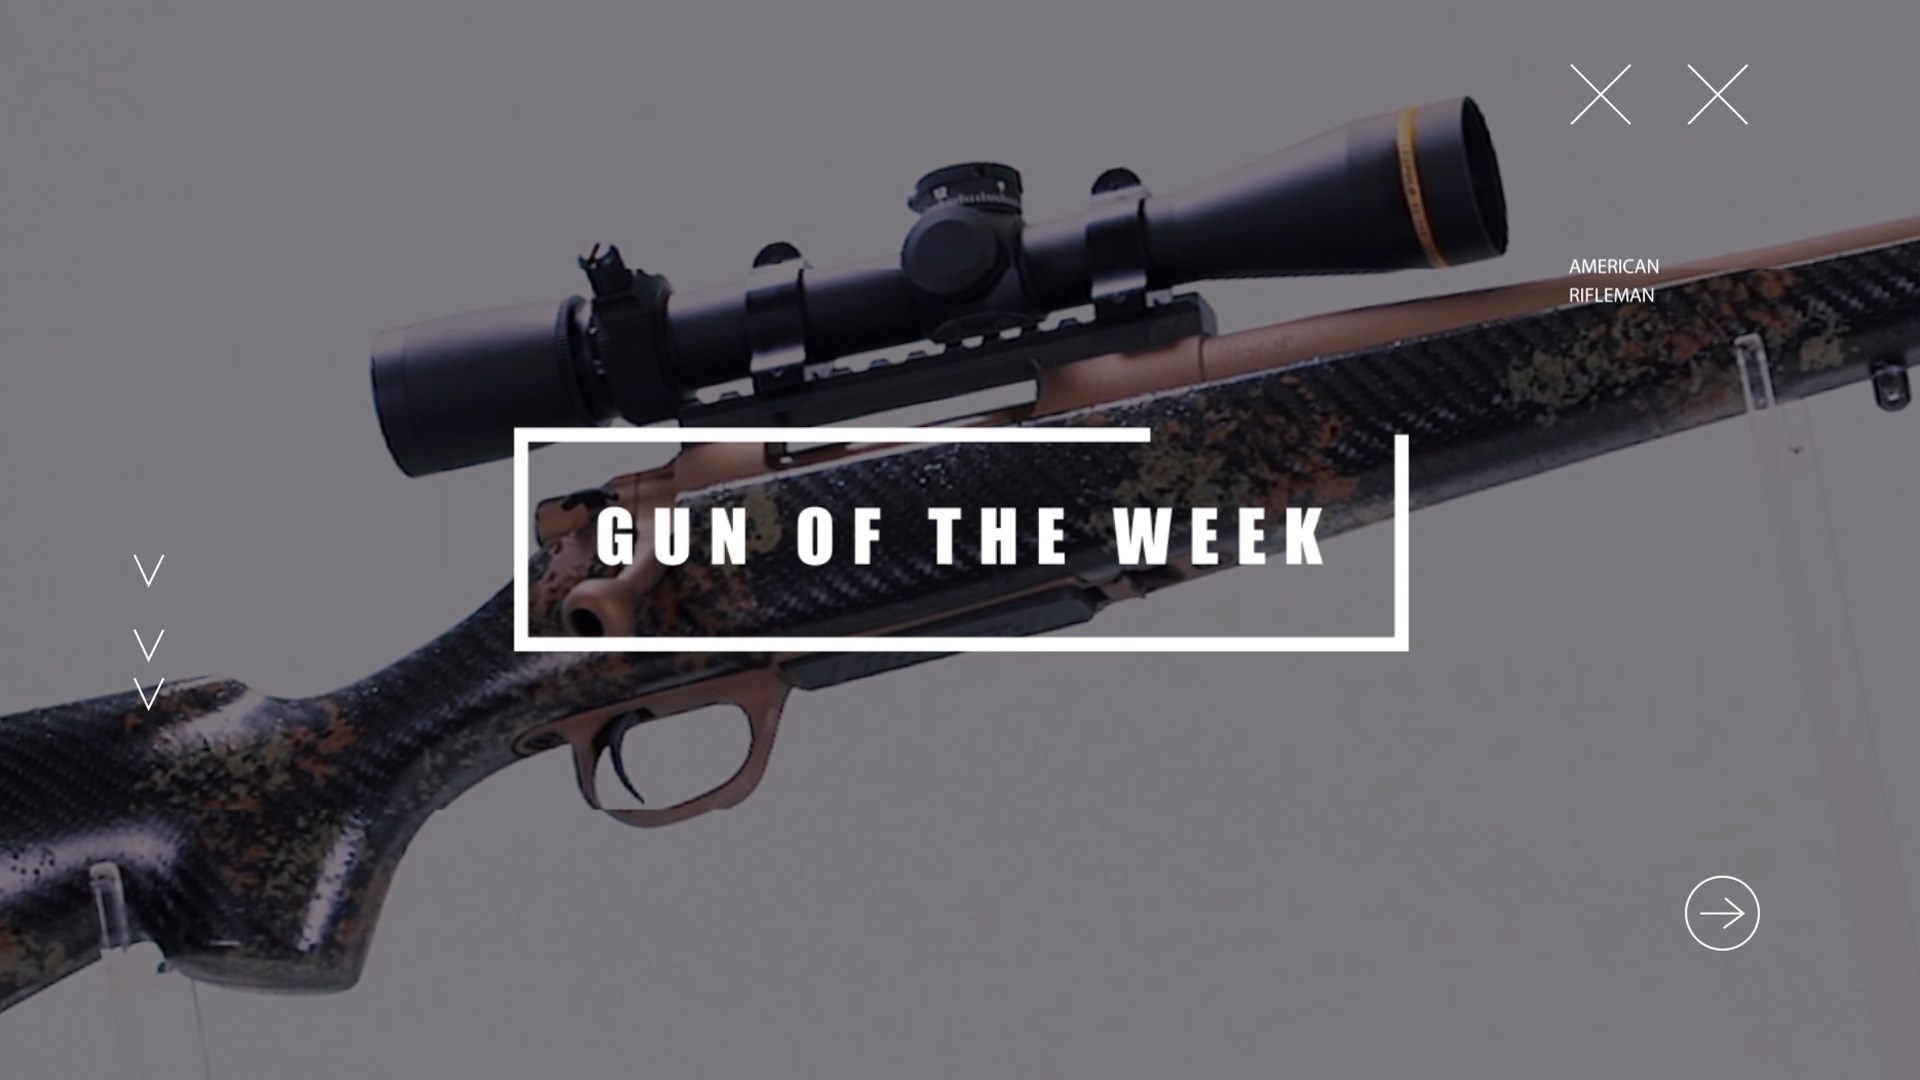 Gun Of The Week title screen text overlay of howa m1500 super lite carbon bolt-action rifle background leupold gold ring optic scope